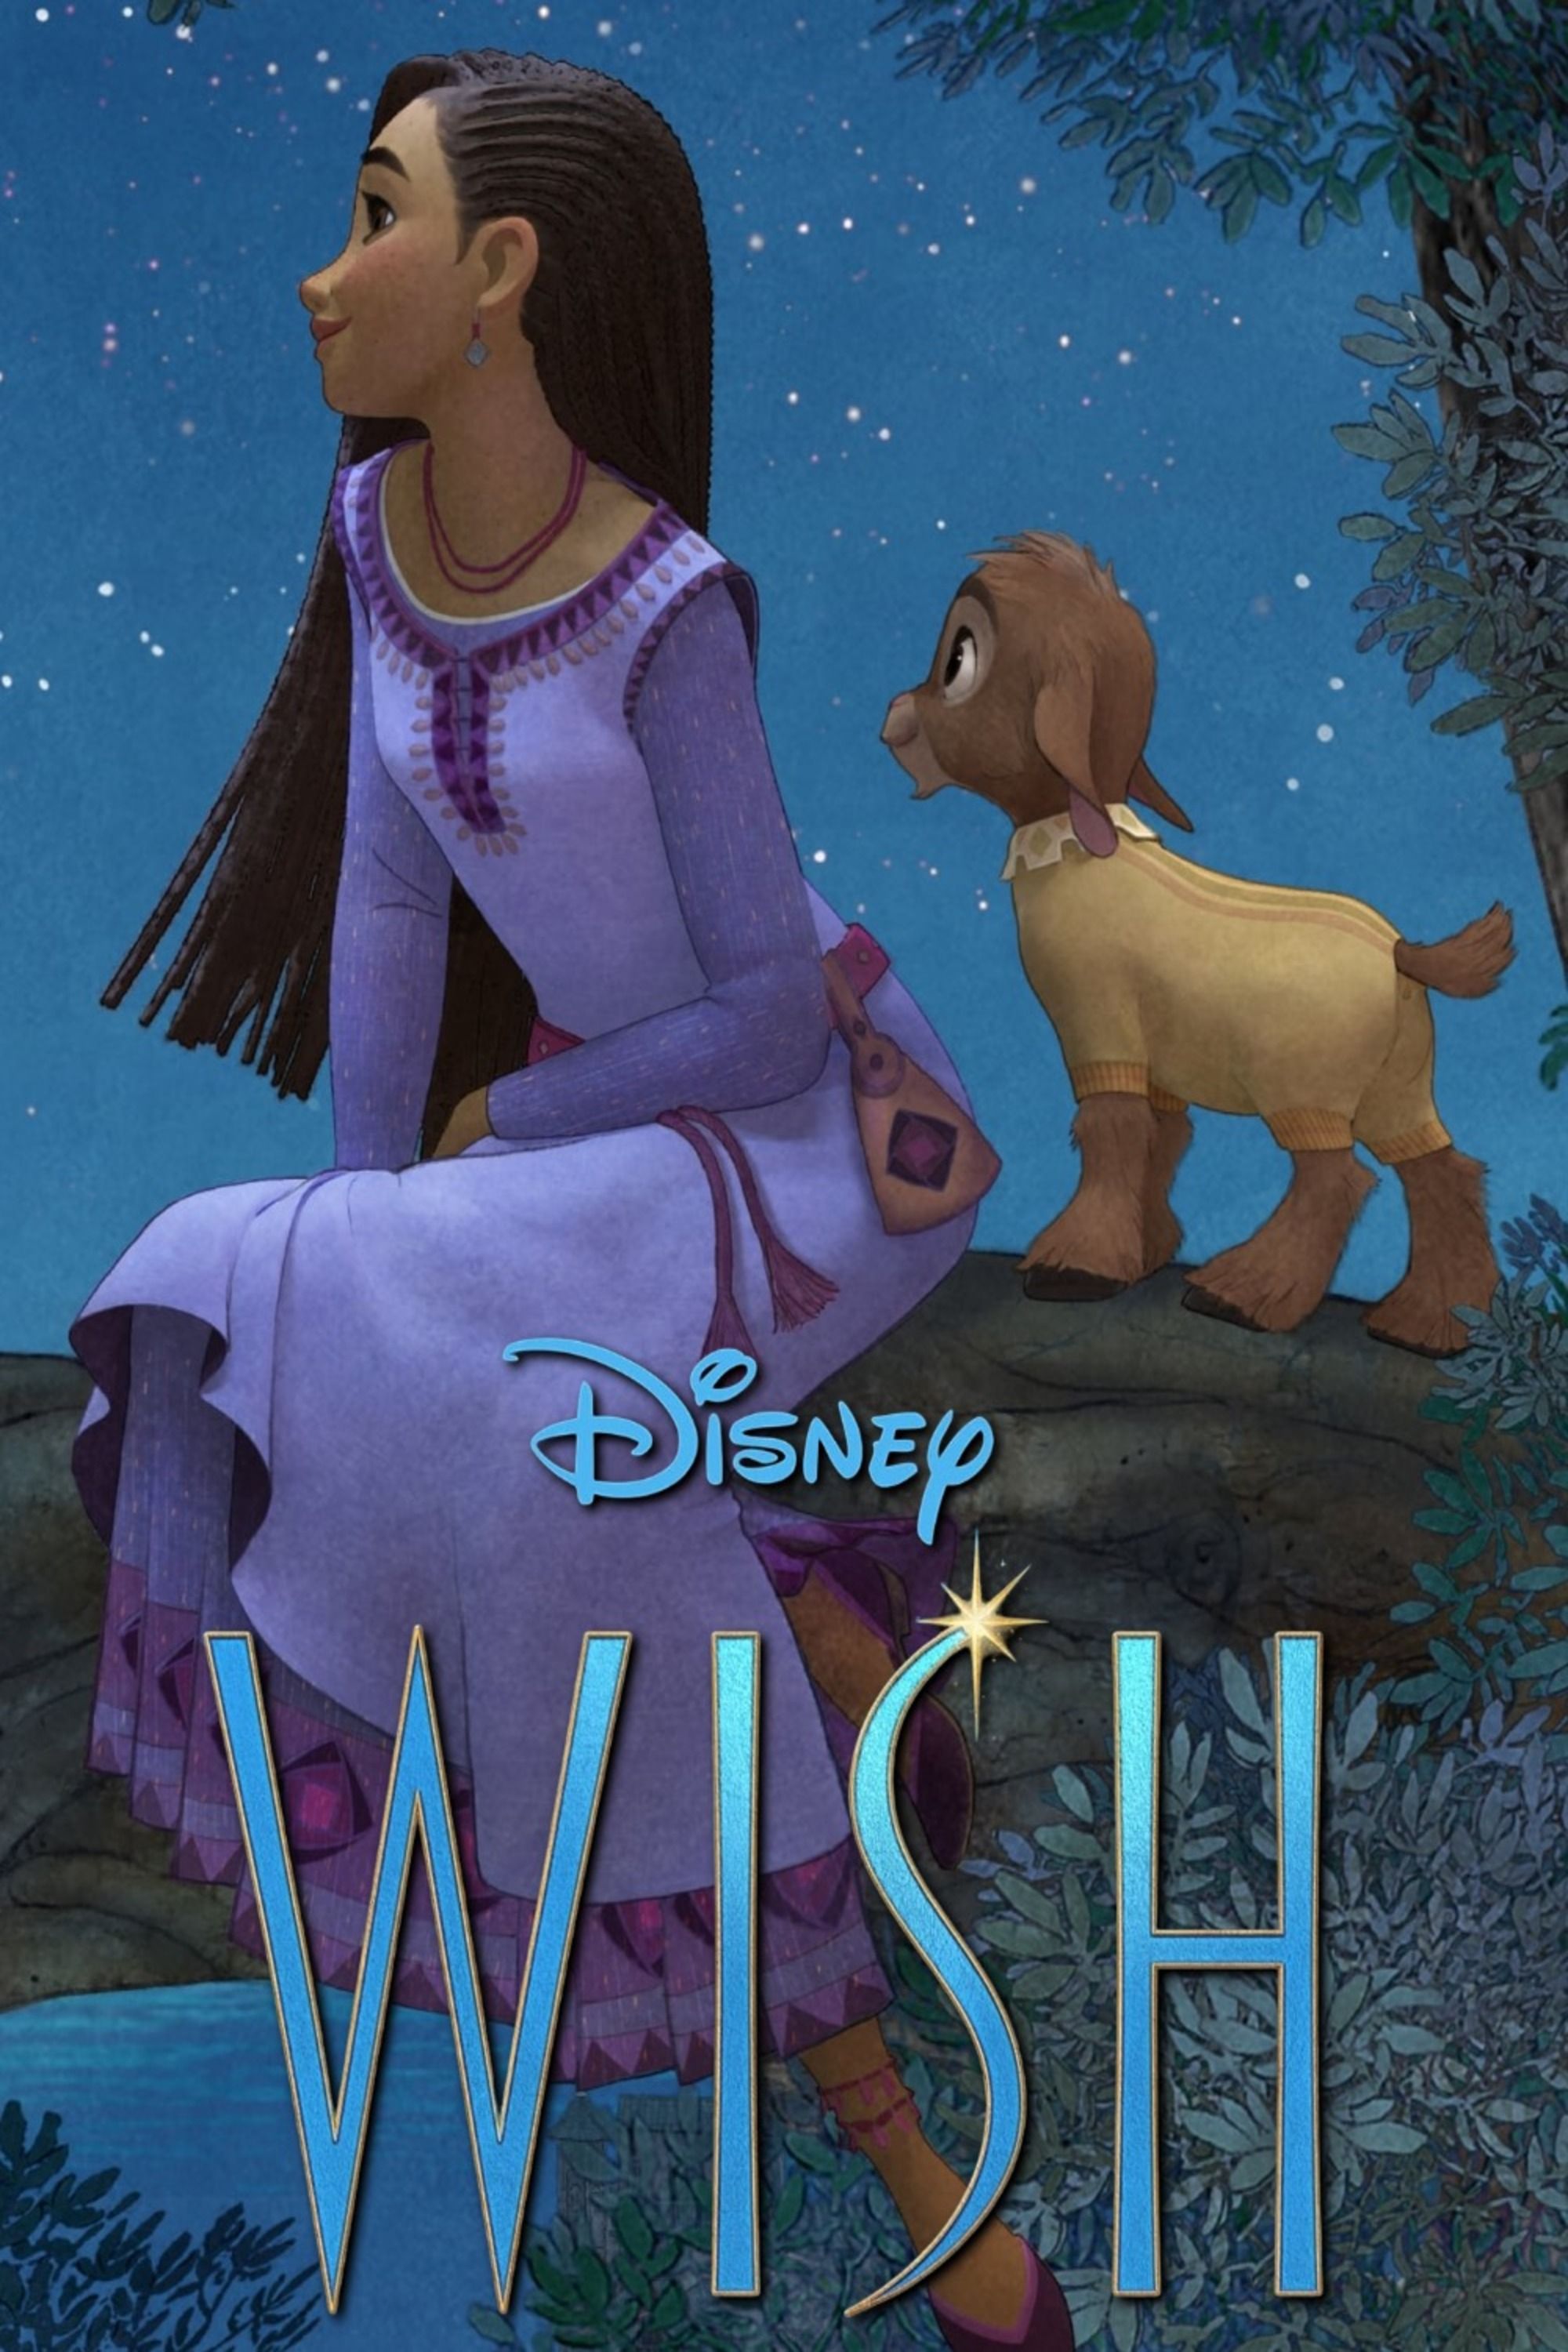 Why 'Wish' Looks So Different From Other Recent Disney Films